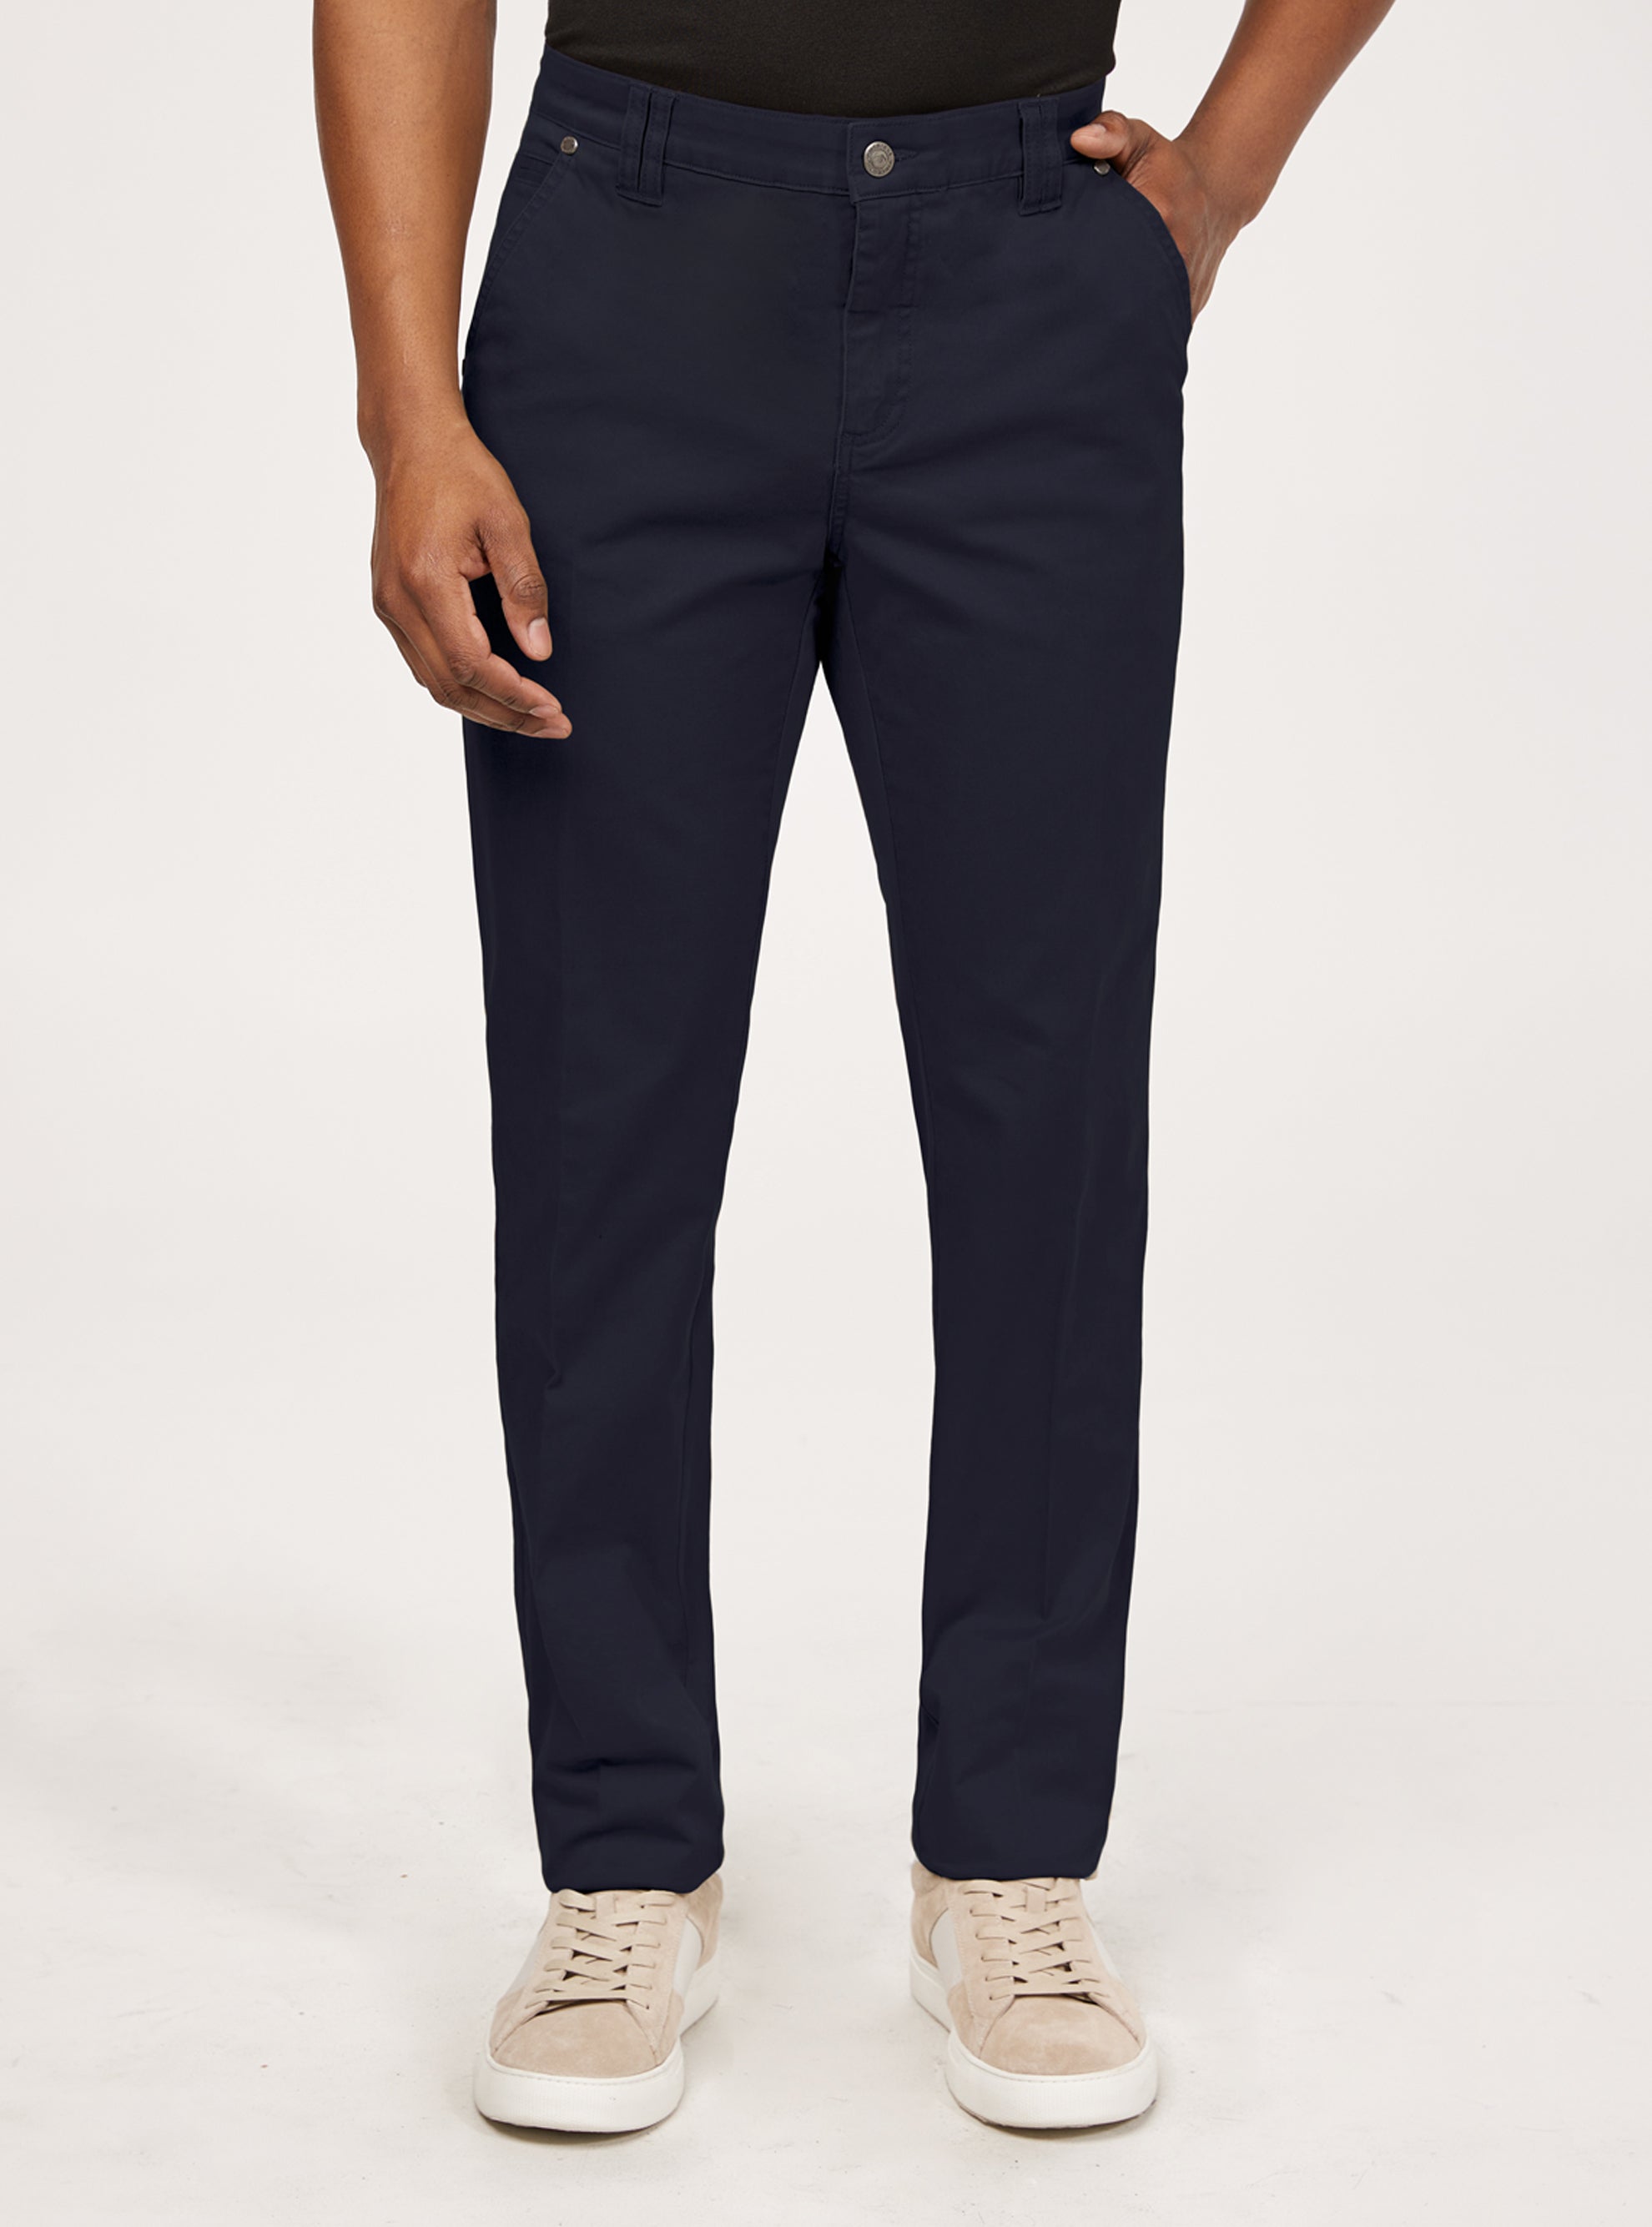 Men's colorful stretch twill style trousers with slant pockets navy